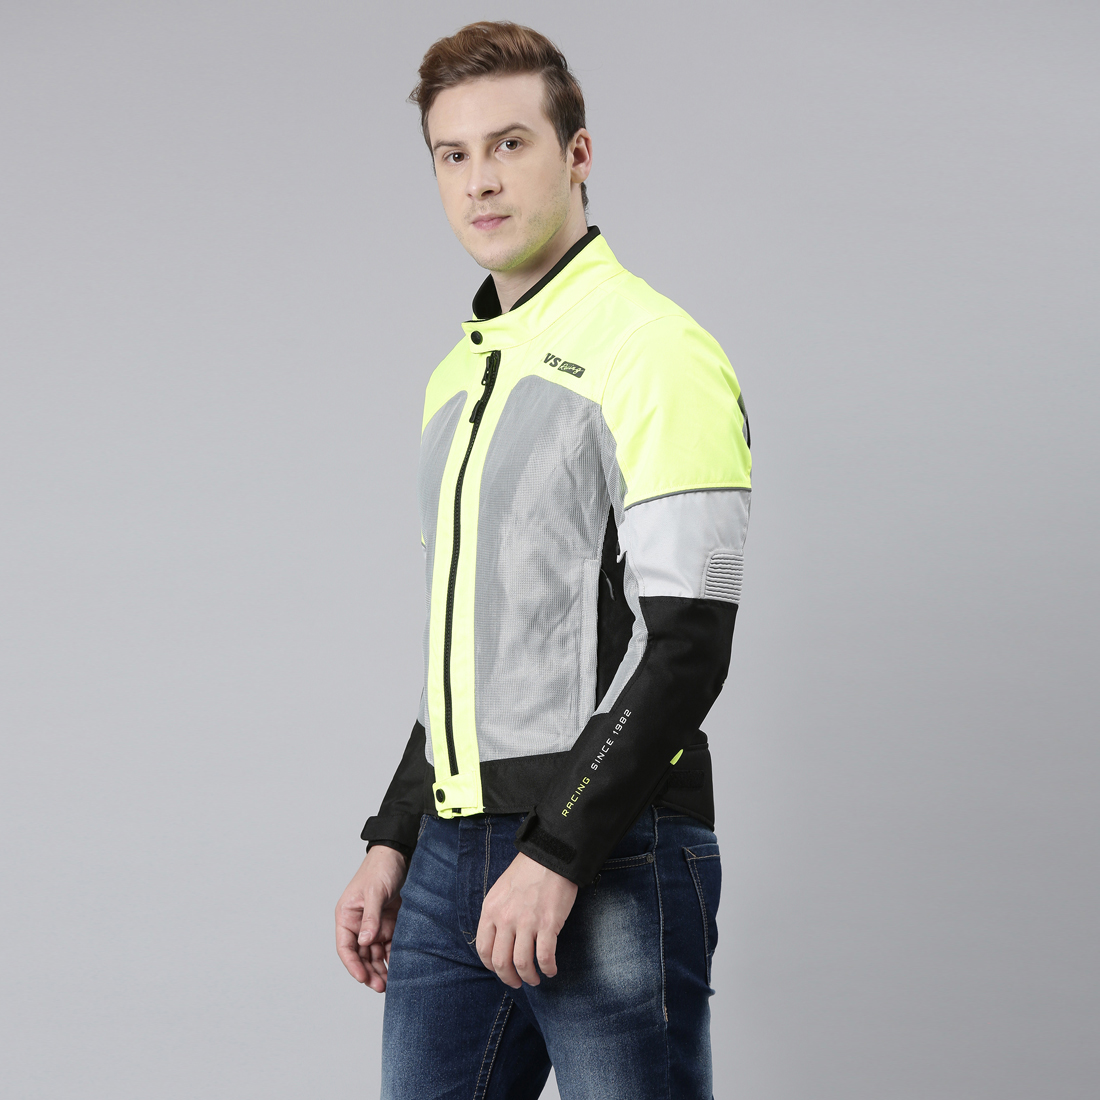  TVS Racing Street Striker Riding Jacket for Men- High Abrasion 600D Polyester, CE Level 2 Armour Protection – Essential Bike Jacket for Bikers (Neon)